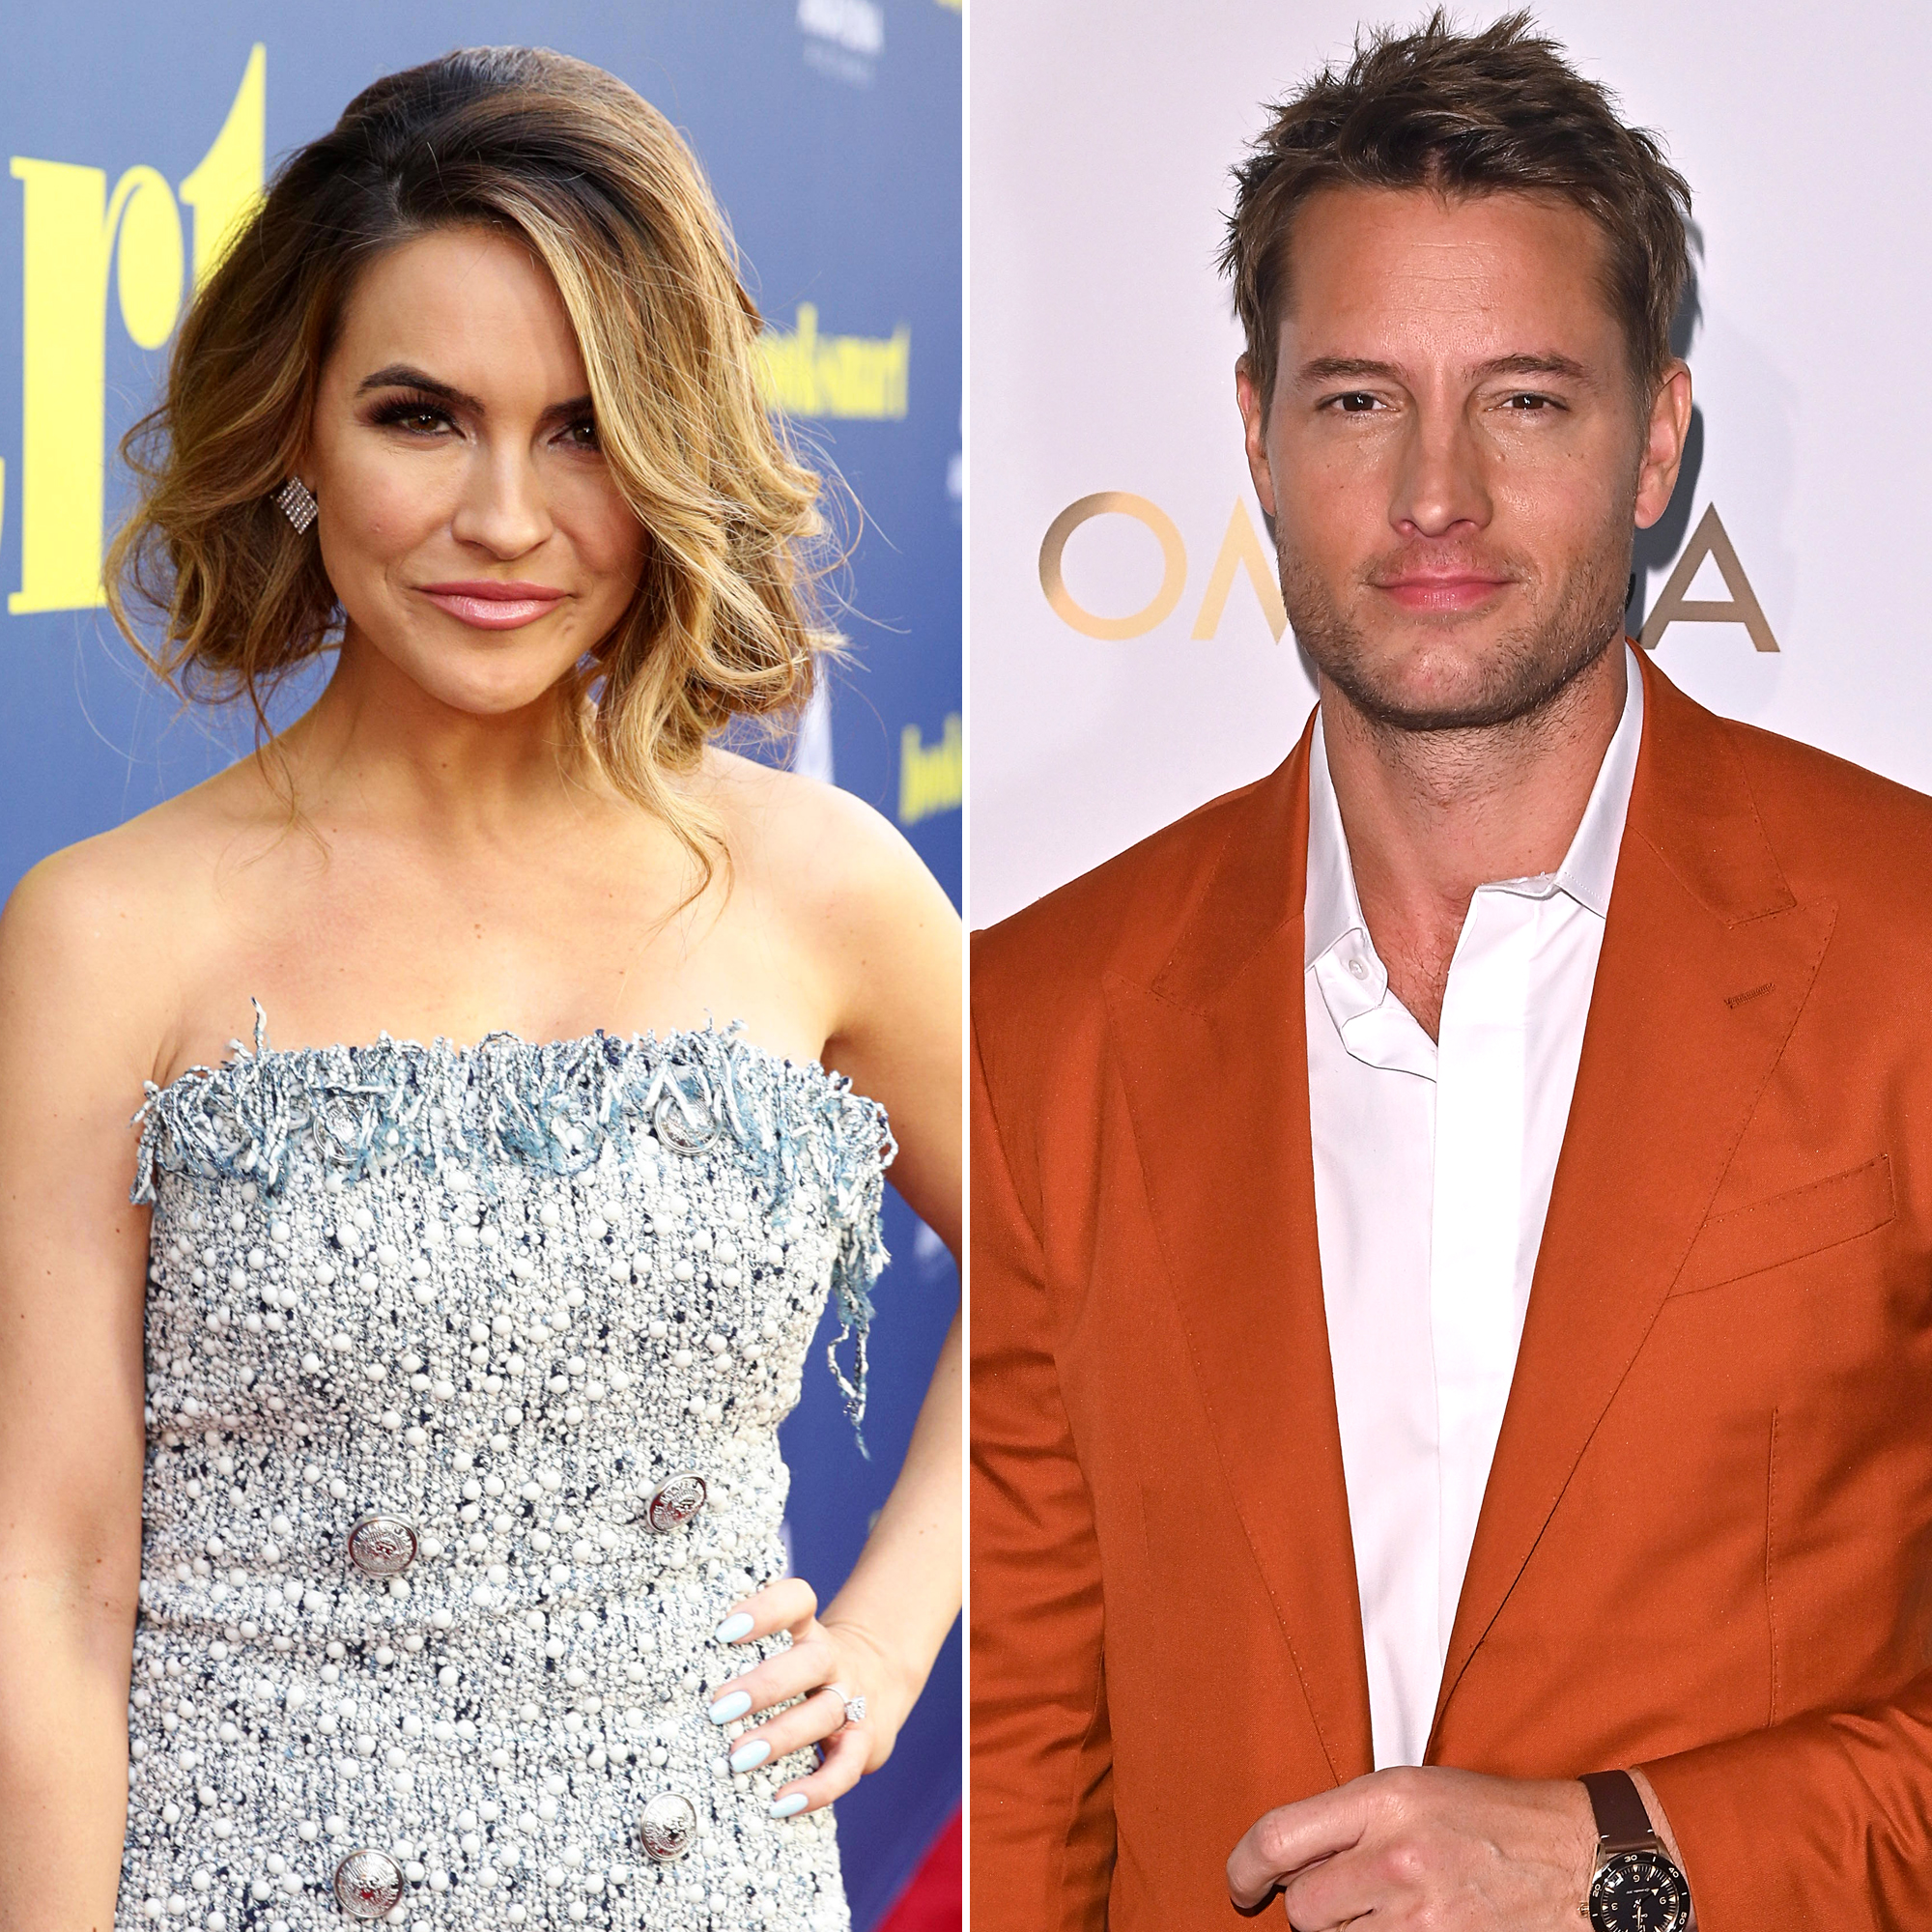 https://www.usmagazine.com/wp-content/uploads/2022/01/Every-Time-Chrishell-Stause-Has-Thrown-Shade-at-Ex-Justin-Hartley-Since-Their-Split.jpg?quality=40&strip=all